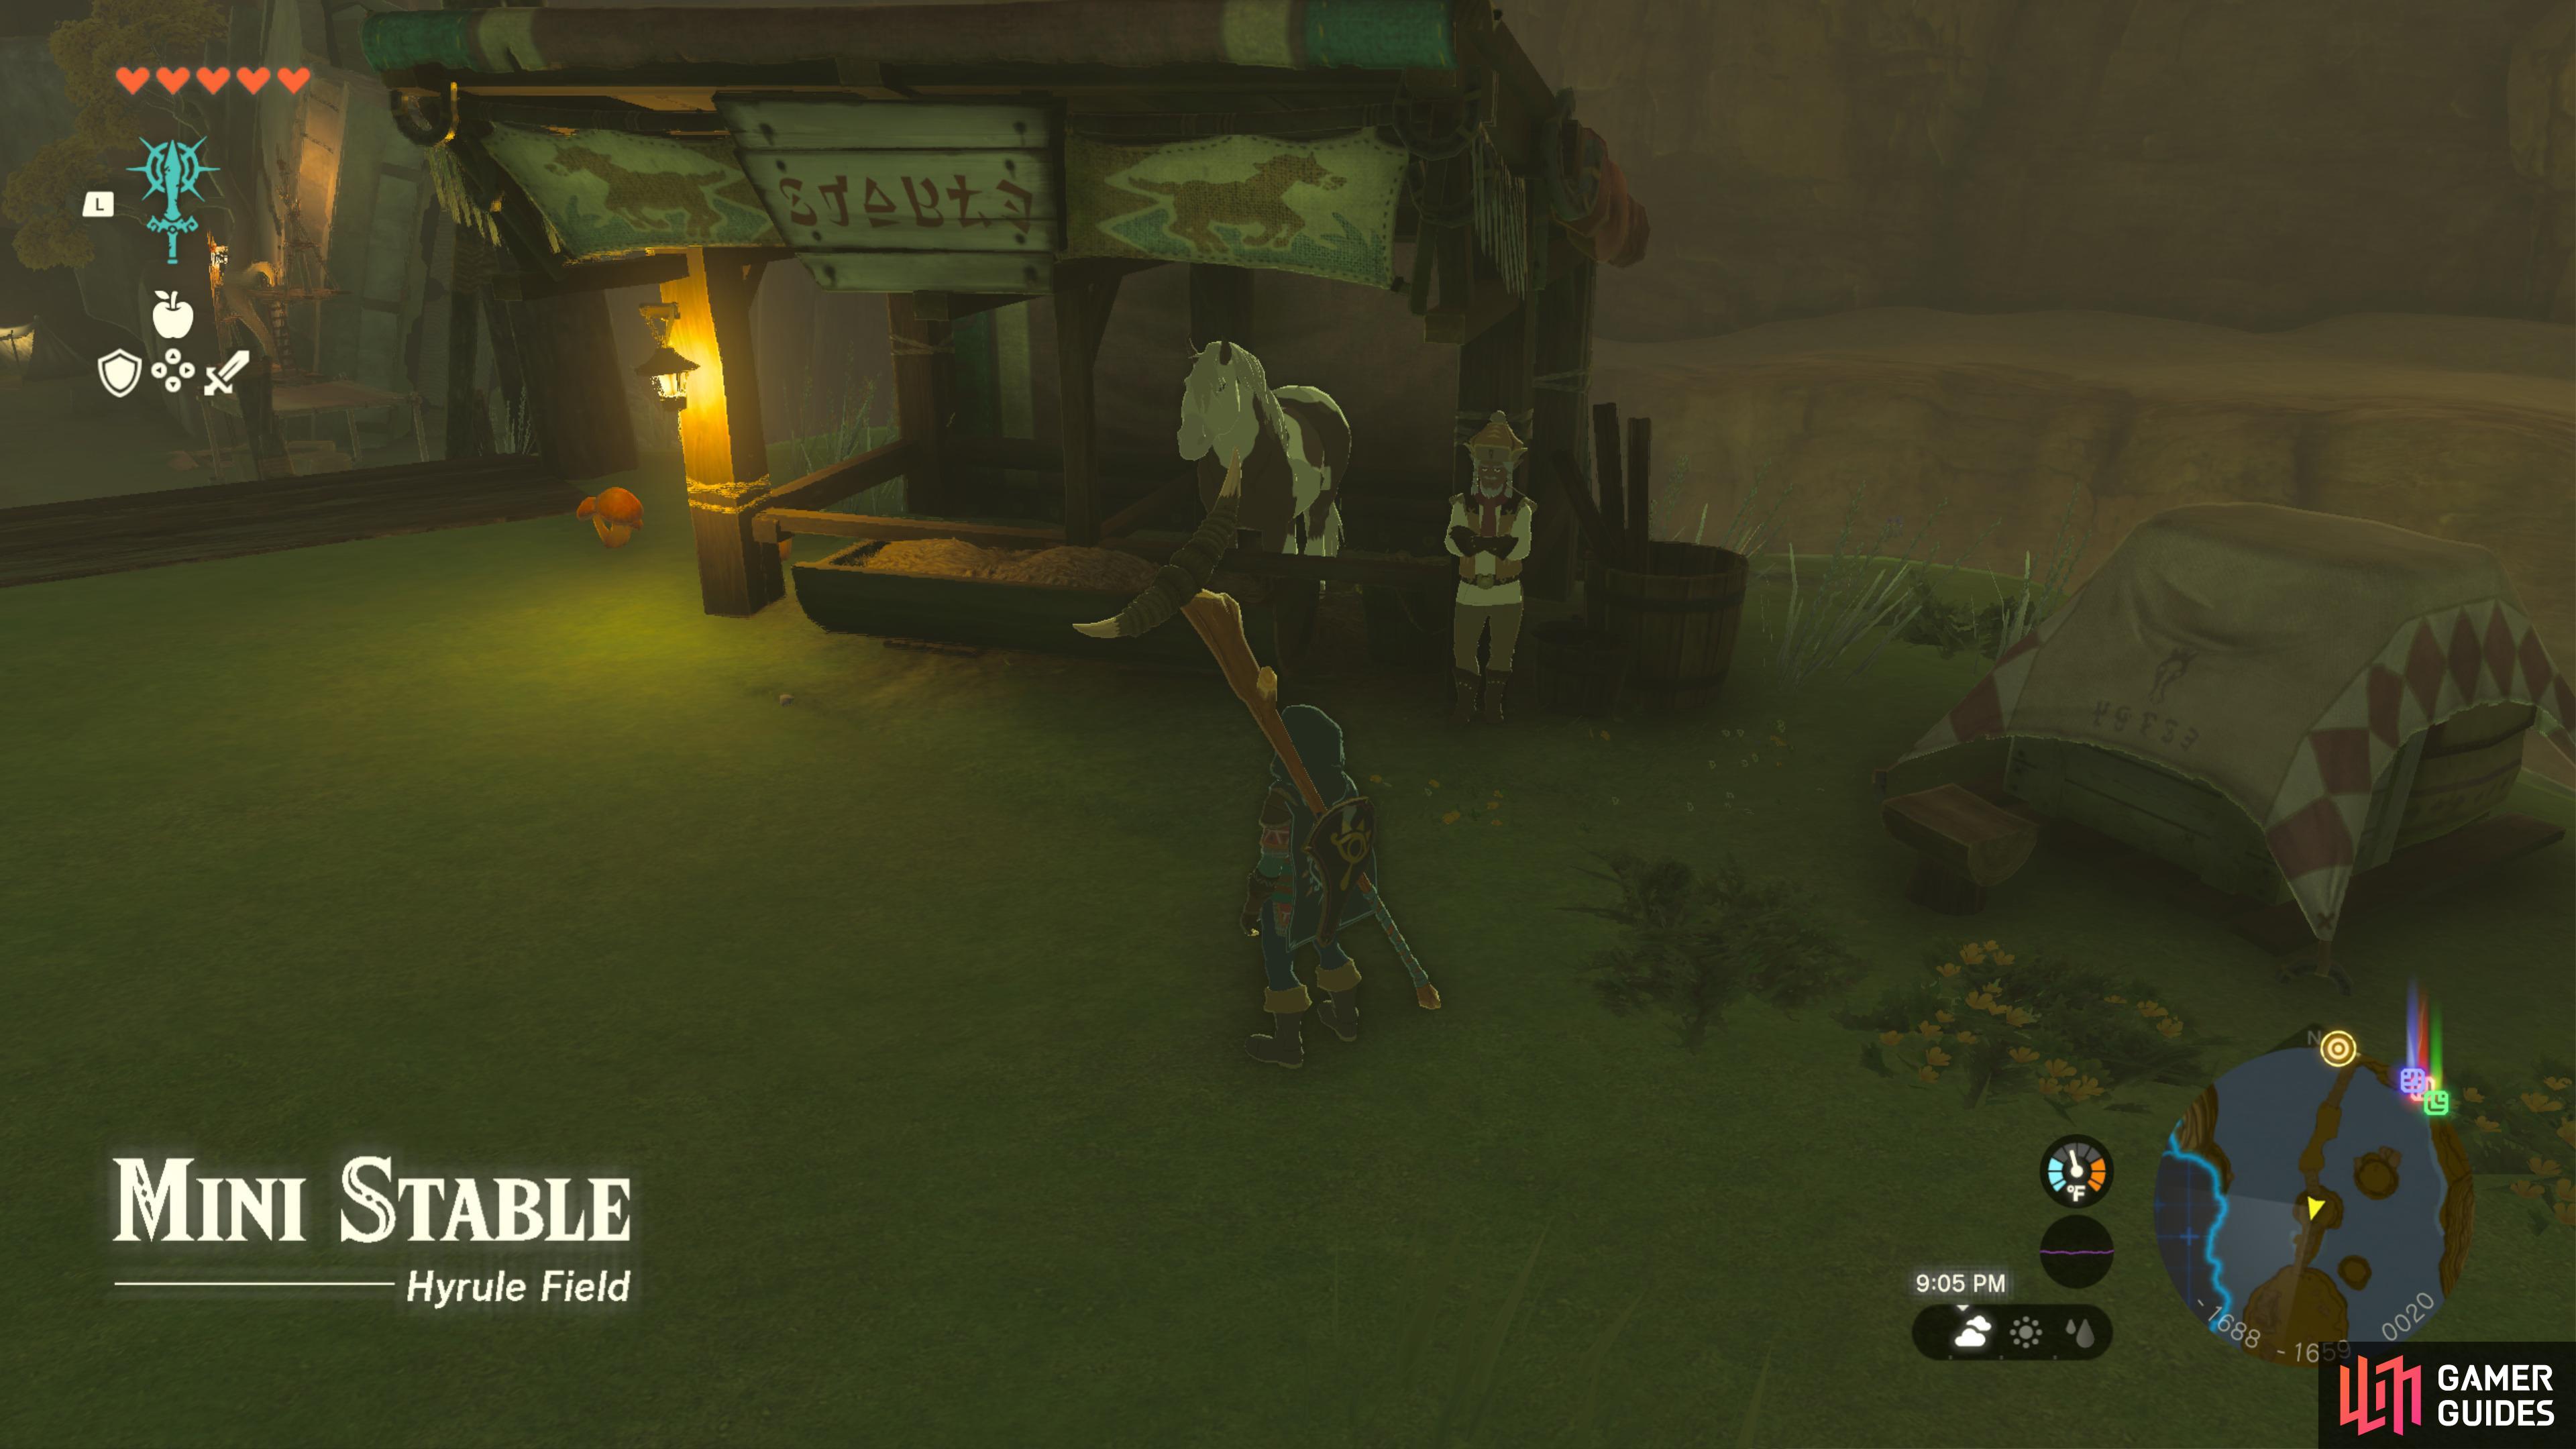 Mini Stable found between Central Hyrule and Gerudo.